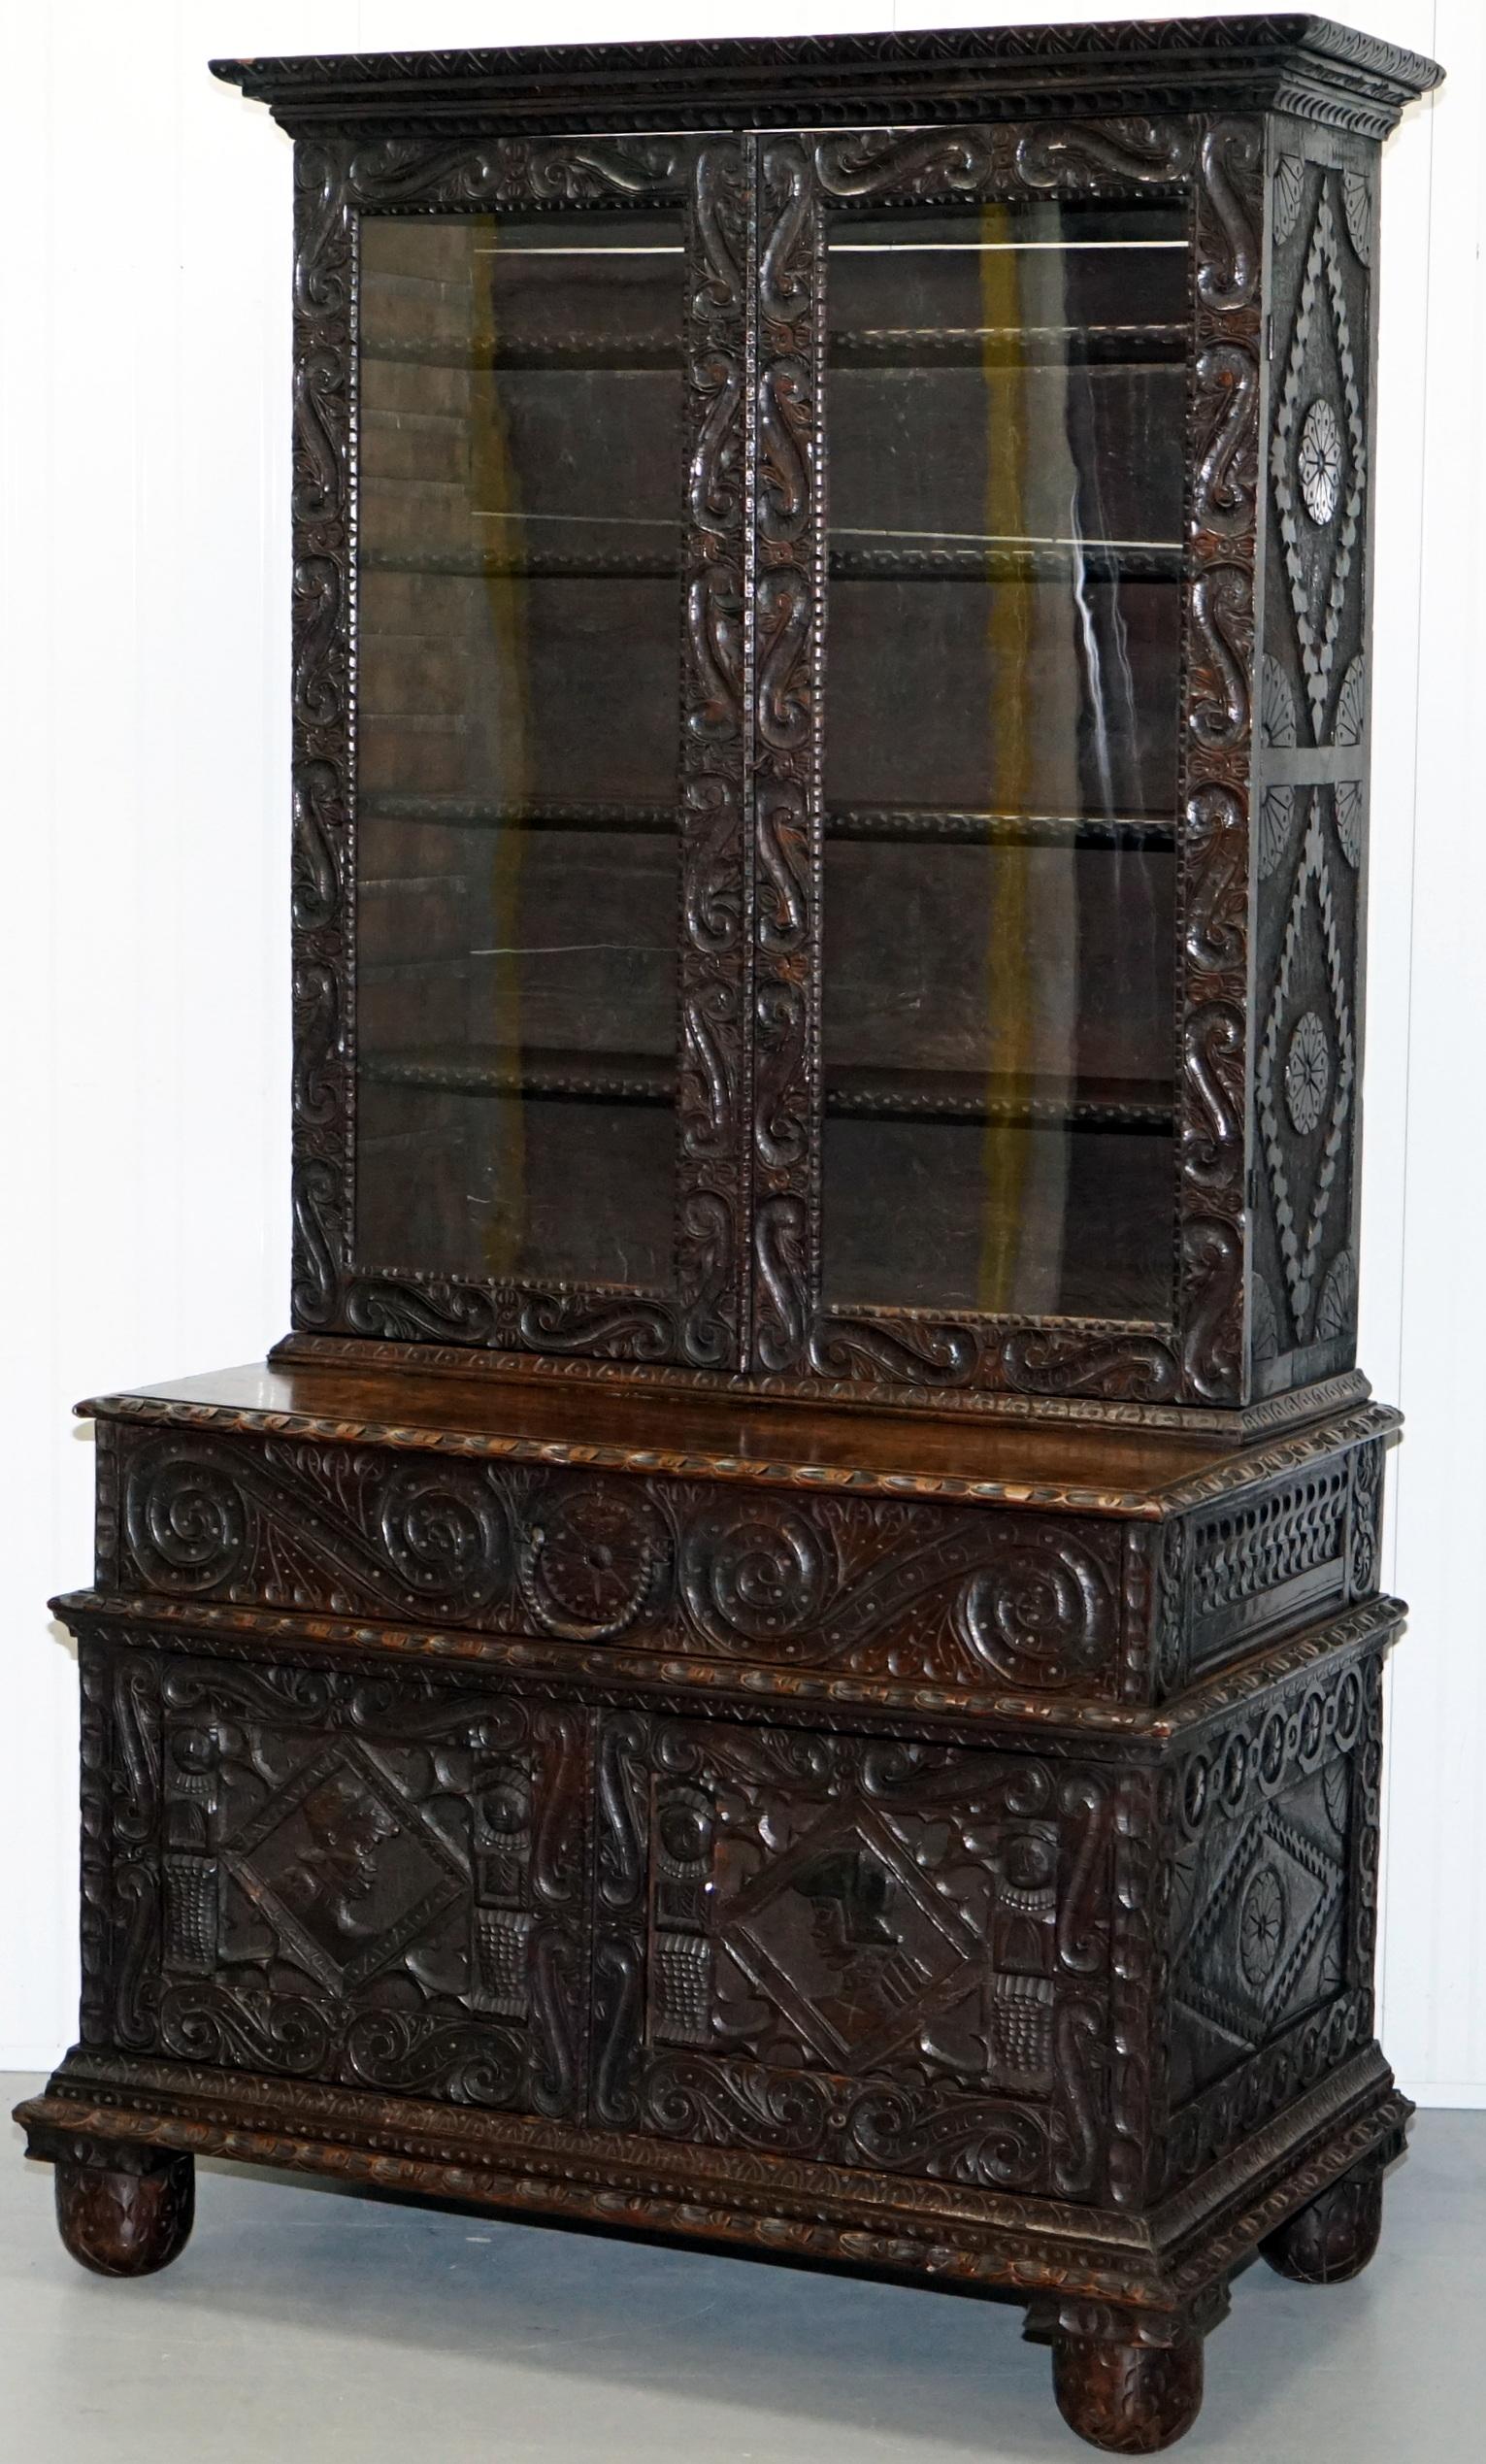 We are delighted to offer for sale this stunning handmade in England from solid English oak early 18th century circa 1740 bookcase cabinet

A very rustic early piece of English country house furniture, the carving is naive and period, each of the